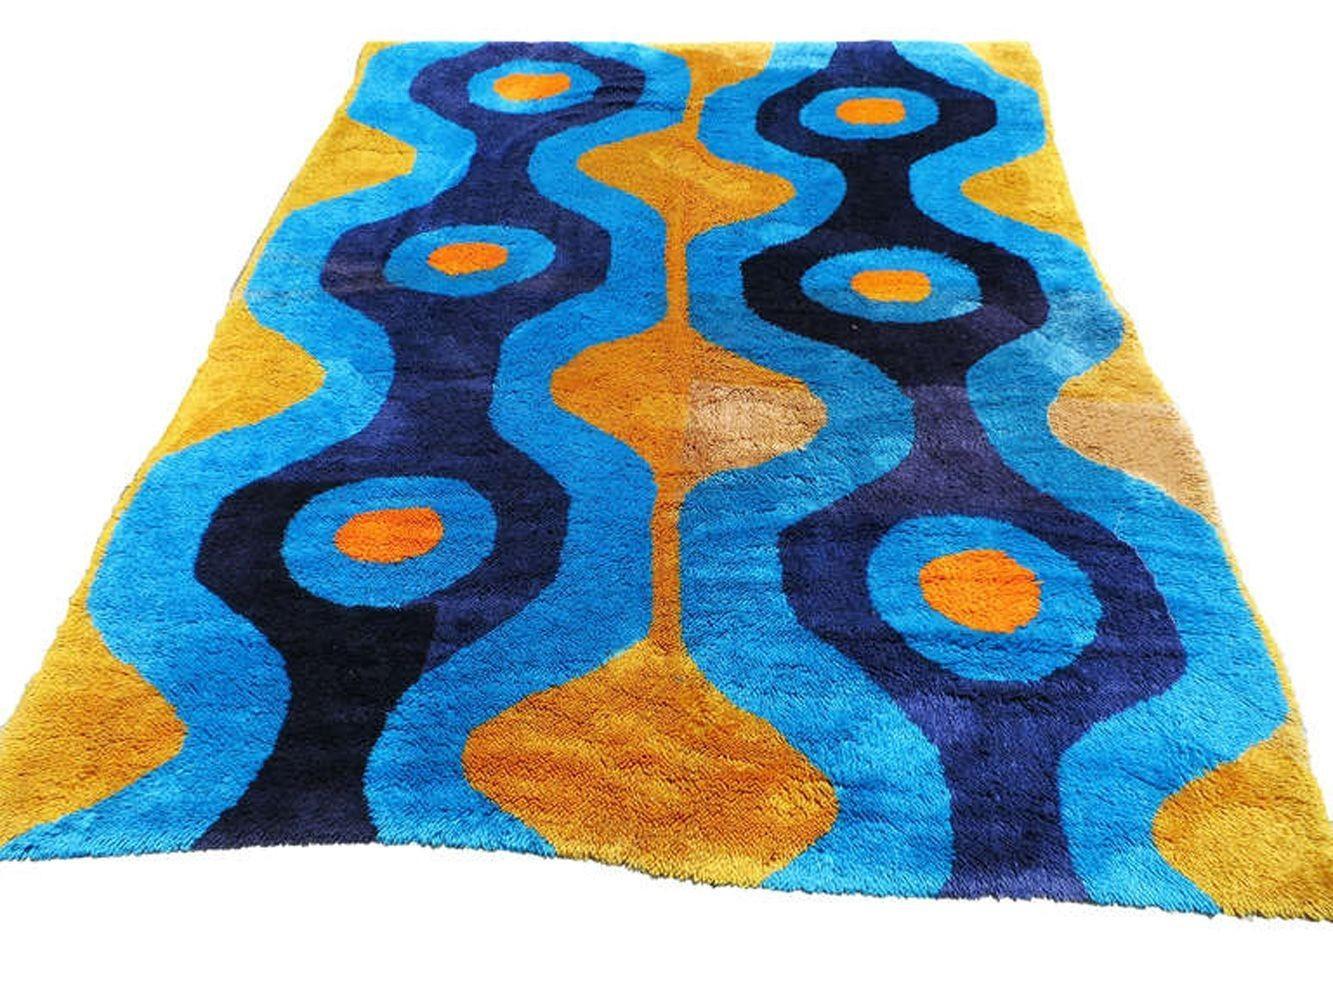 Large California 7' hand-hooked wool area rug with an abstract picture of light blues undertones contrasting against dark blue hourglass shapes with a crisp yellow background. Great late Modernist rug that is sure to fit any decor.

California, 1970